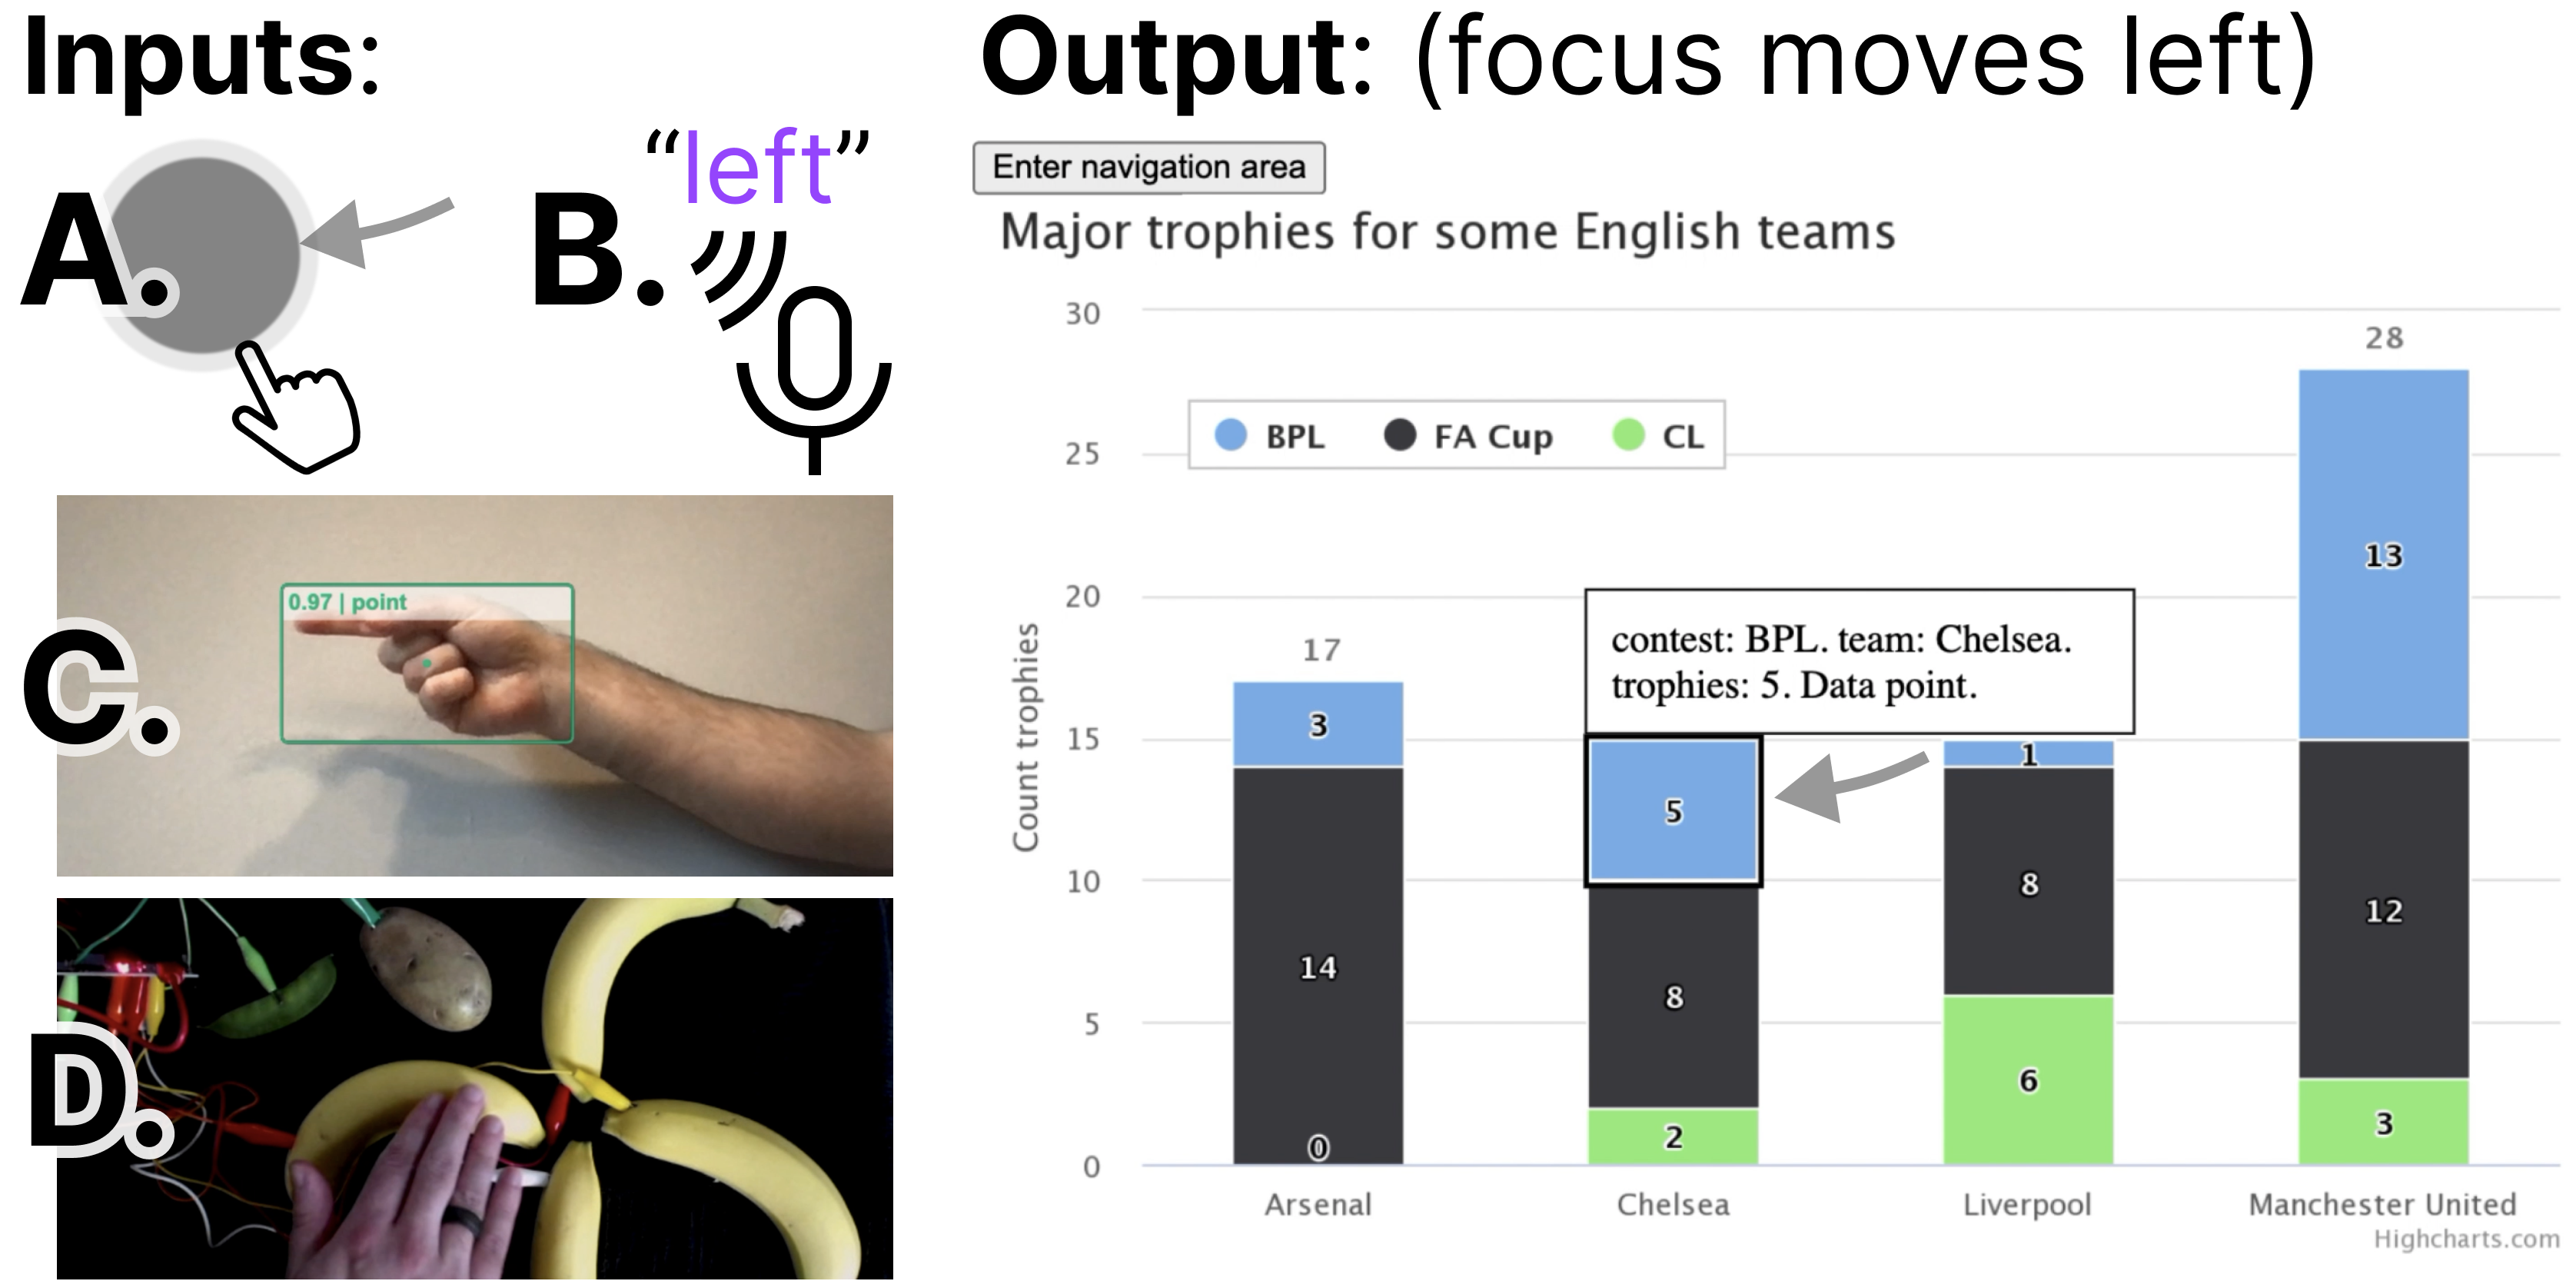 Image in two parts. First part: Inputs: A. Hand swiping. B: Speaking 'left.' C. A hand gesture on camera. D. Bananas. Second part: Output: (focus moves left) A focus indicator has moved on a bar chart from one stacked bar to another on its left.